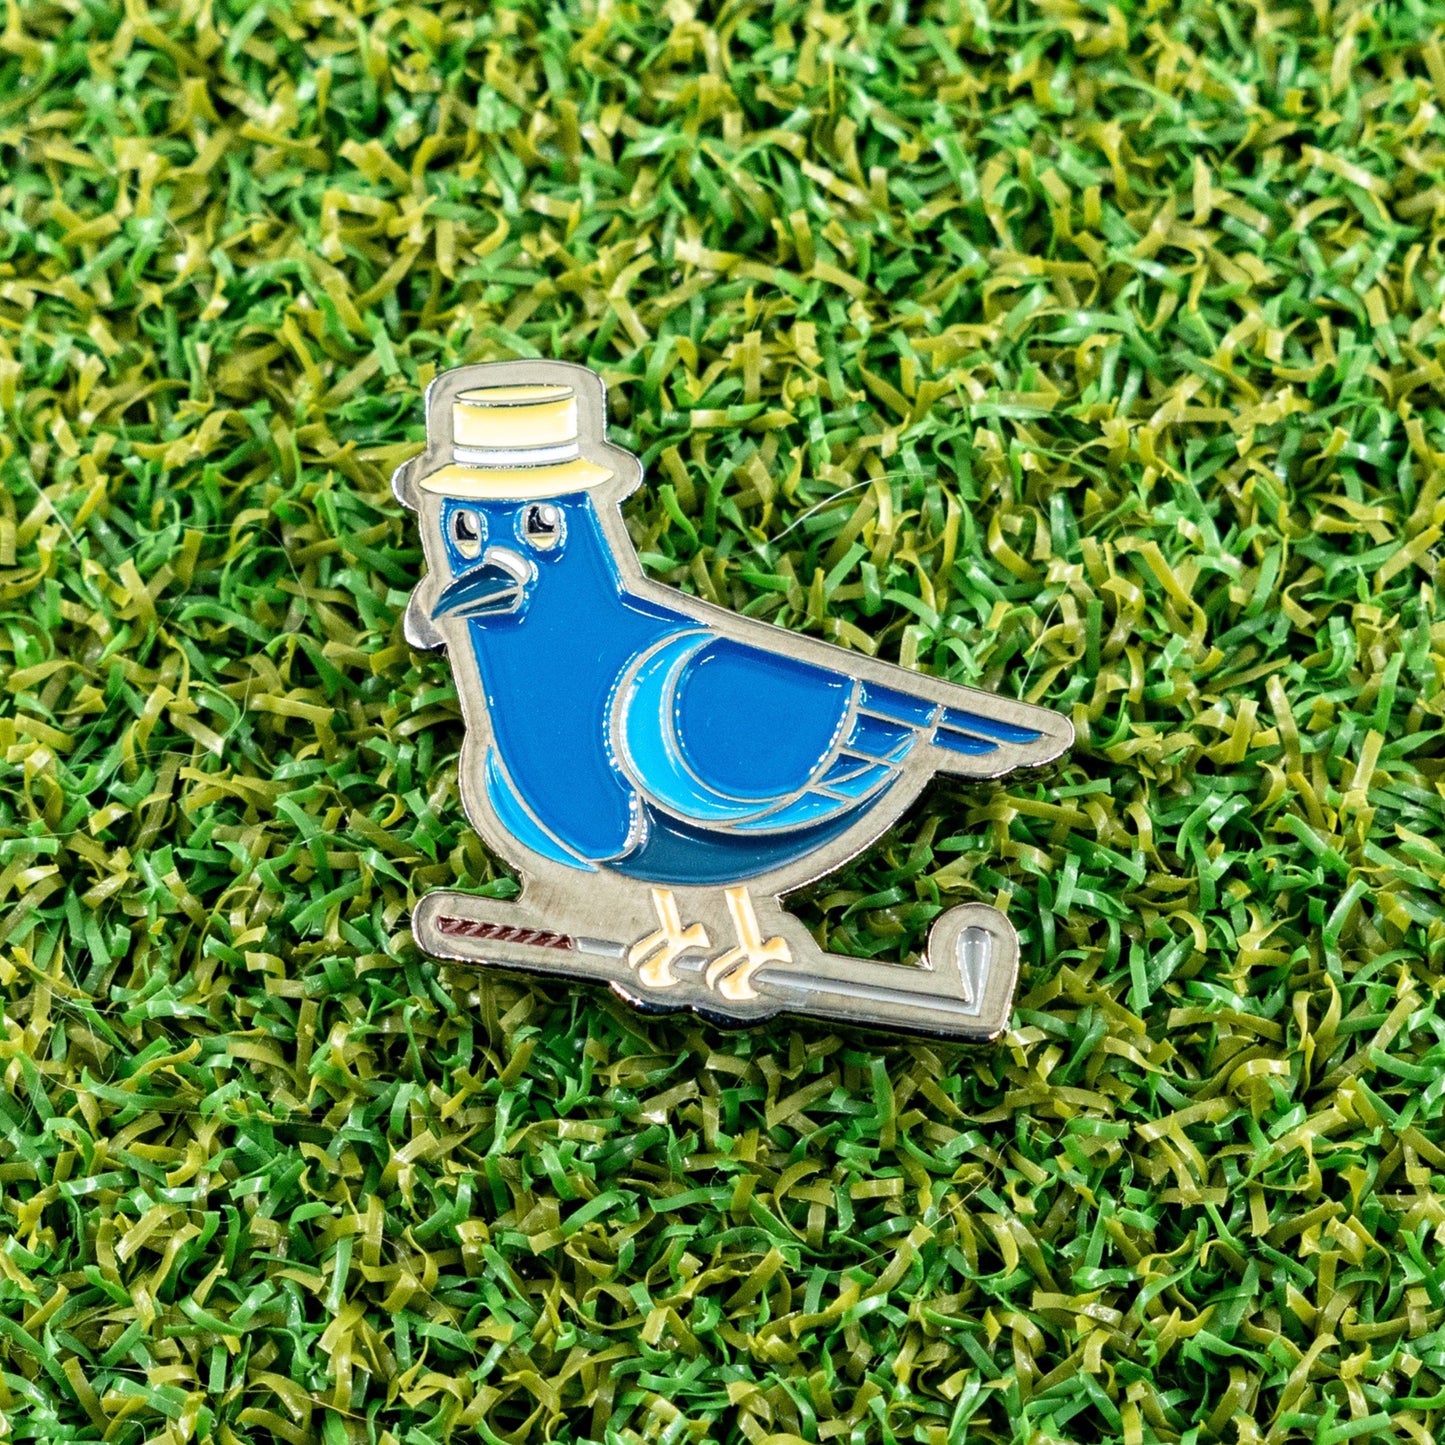 dirty birdie golf ball marker laying on a putting green.